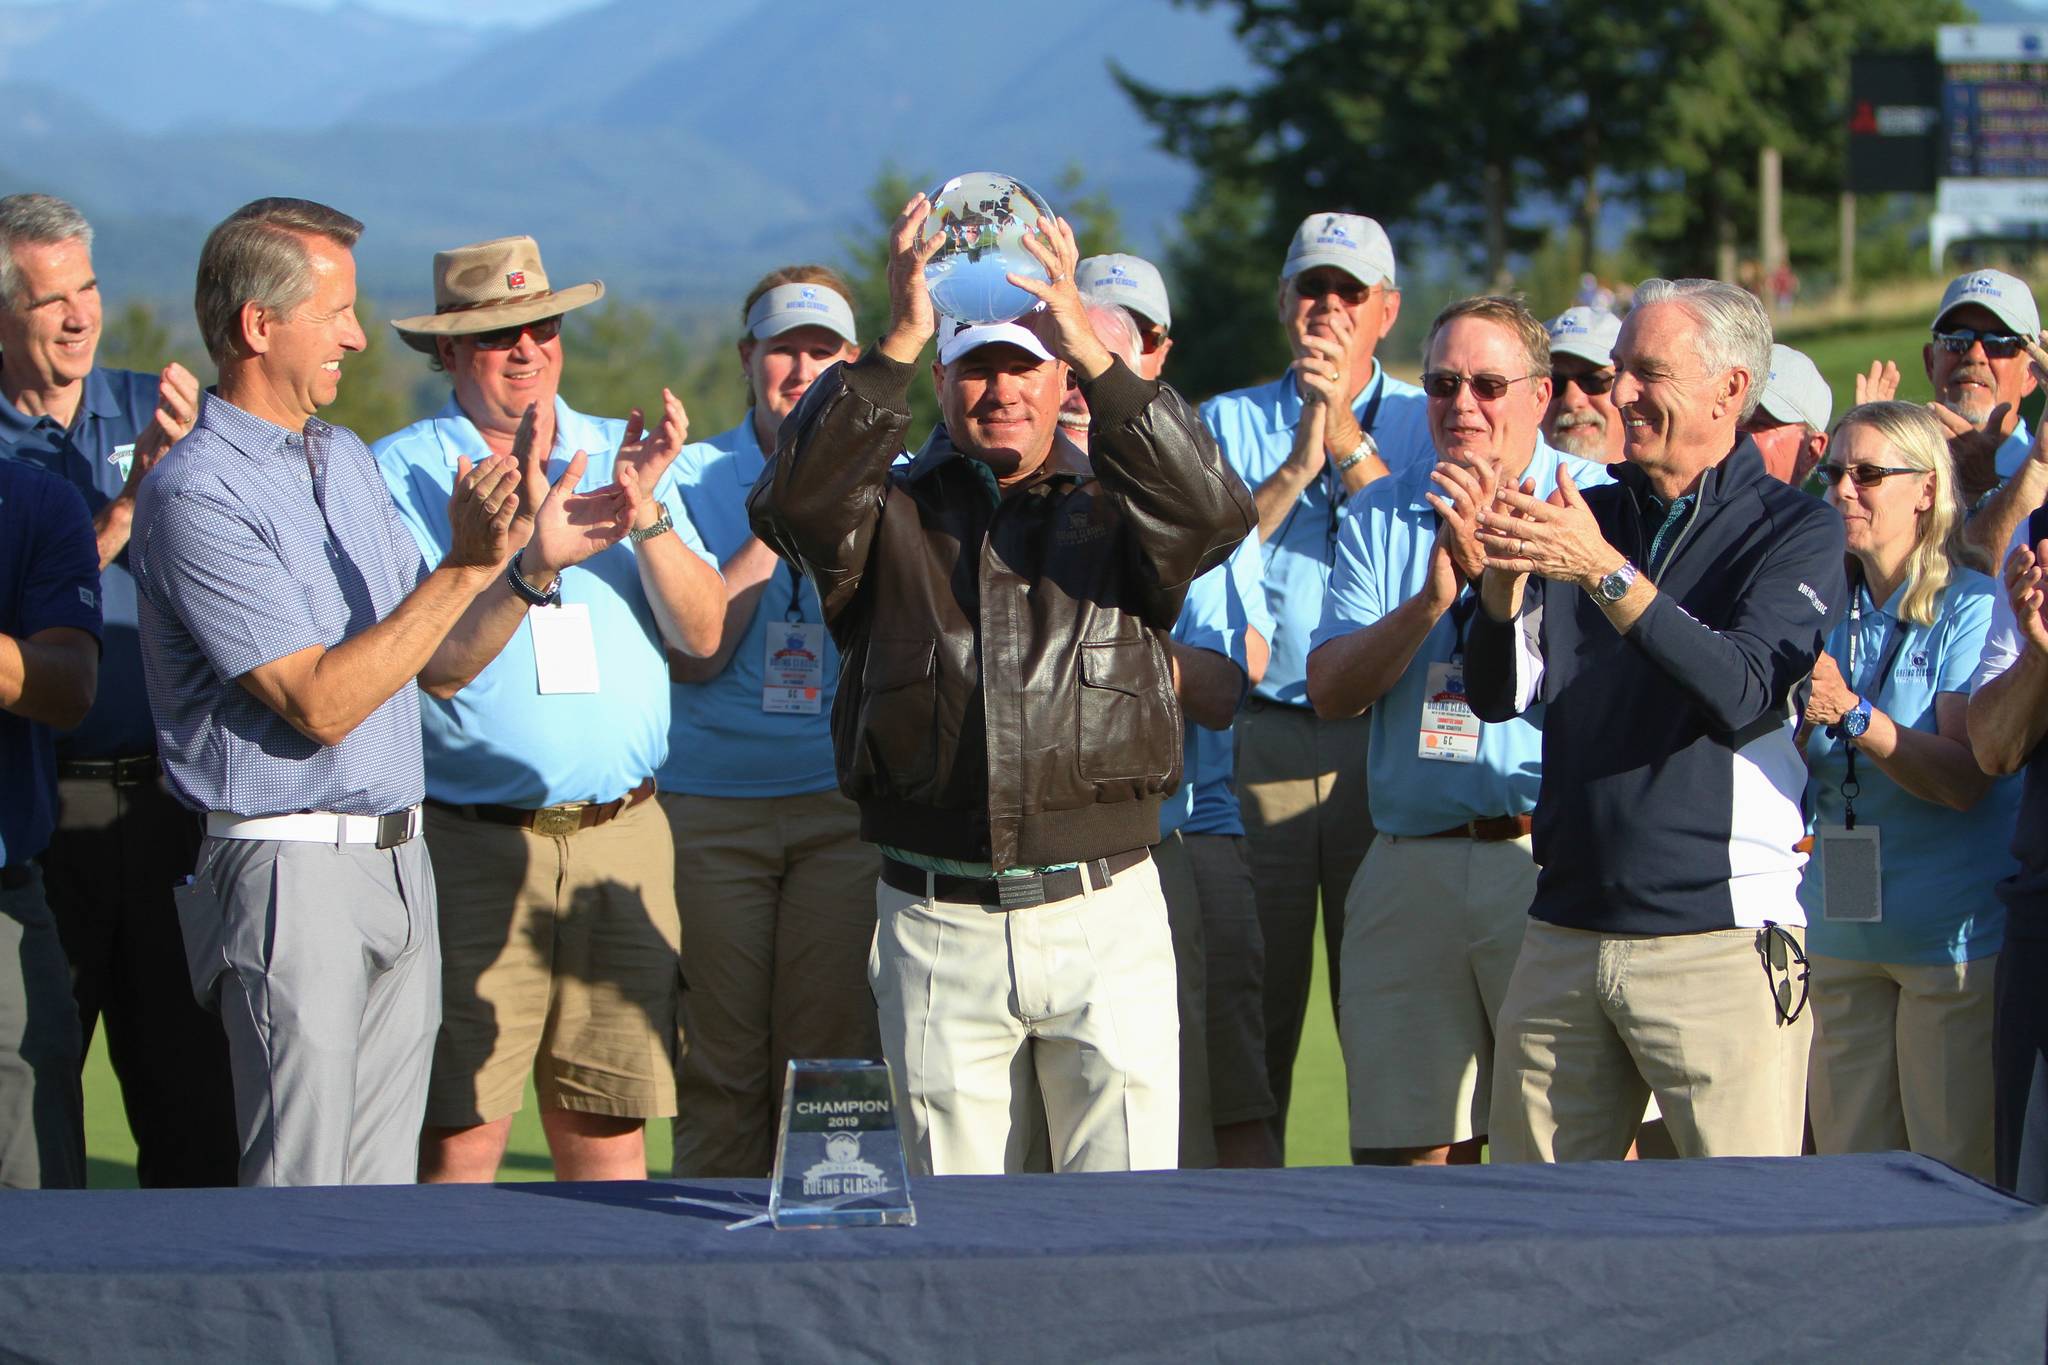 Brandt Jobe receives the champion’s trophy on Aug. 25 at the Boeing Classic held at The Club at Snoqualmie Ridge. Photo courtesy of Jim Nicholson